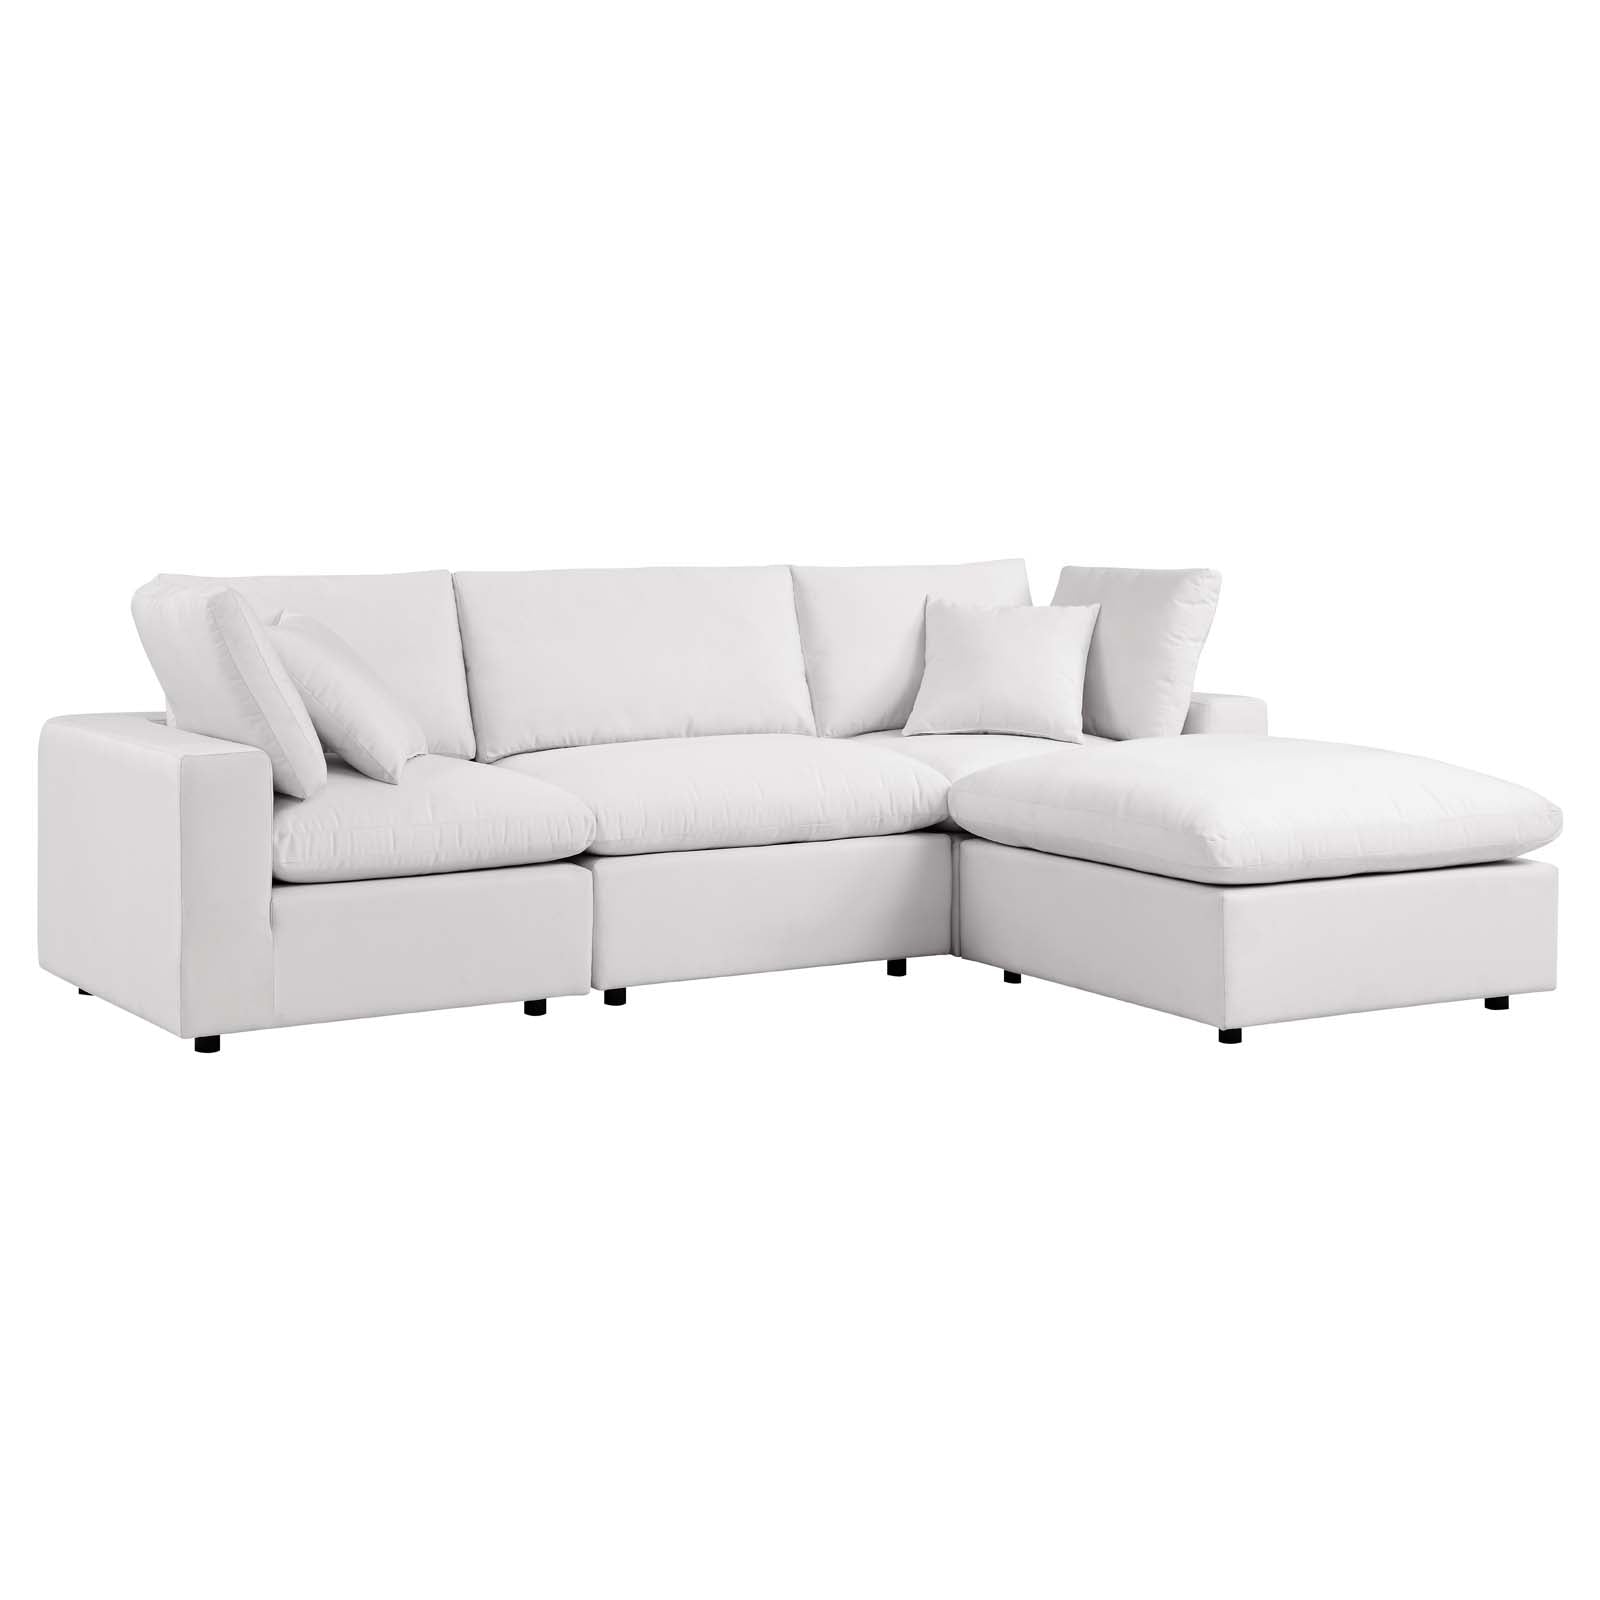 Modway Outdoor Sofas - Commix 4-Piece Outdoor Patio Sectional Sofa White